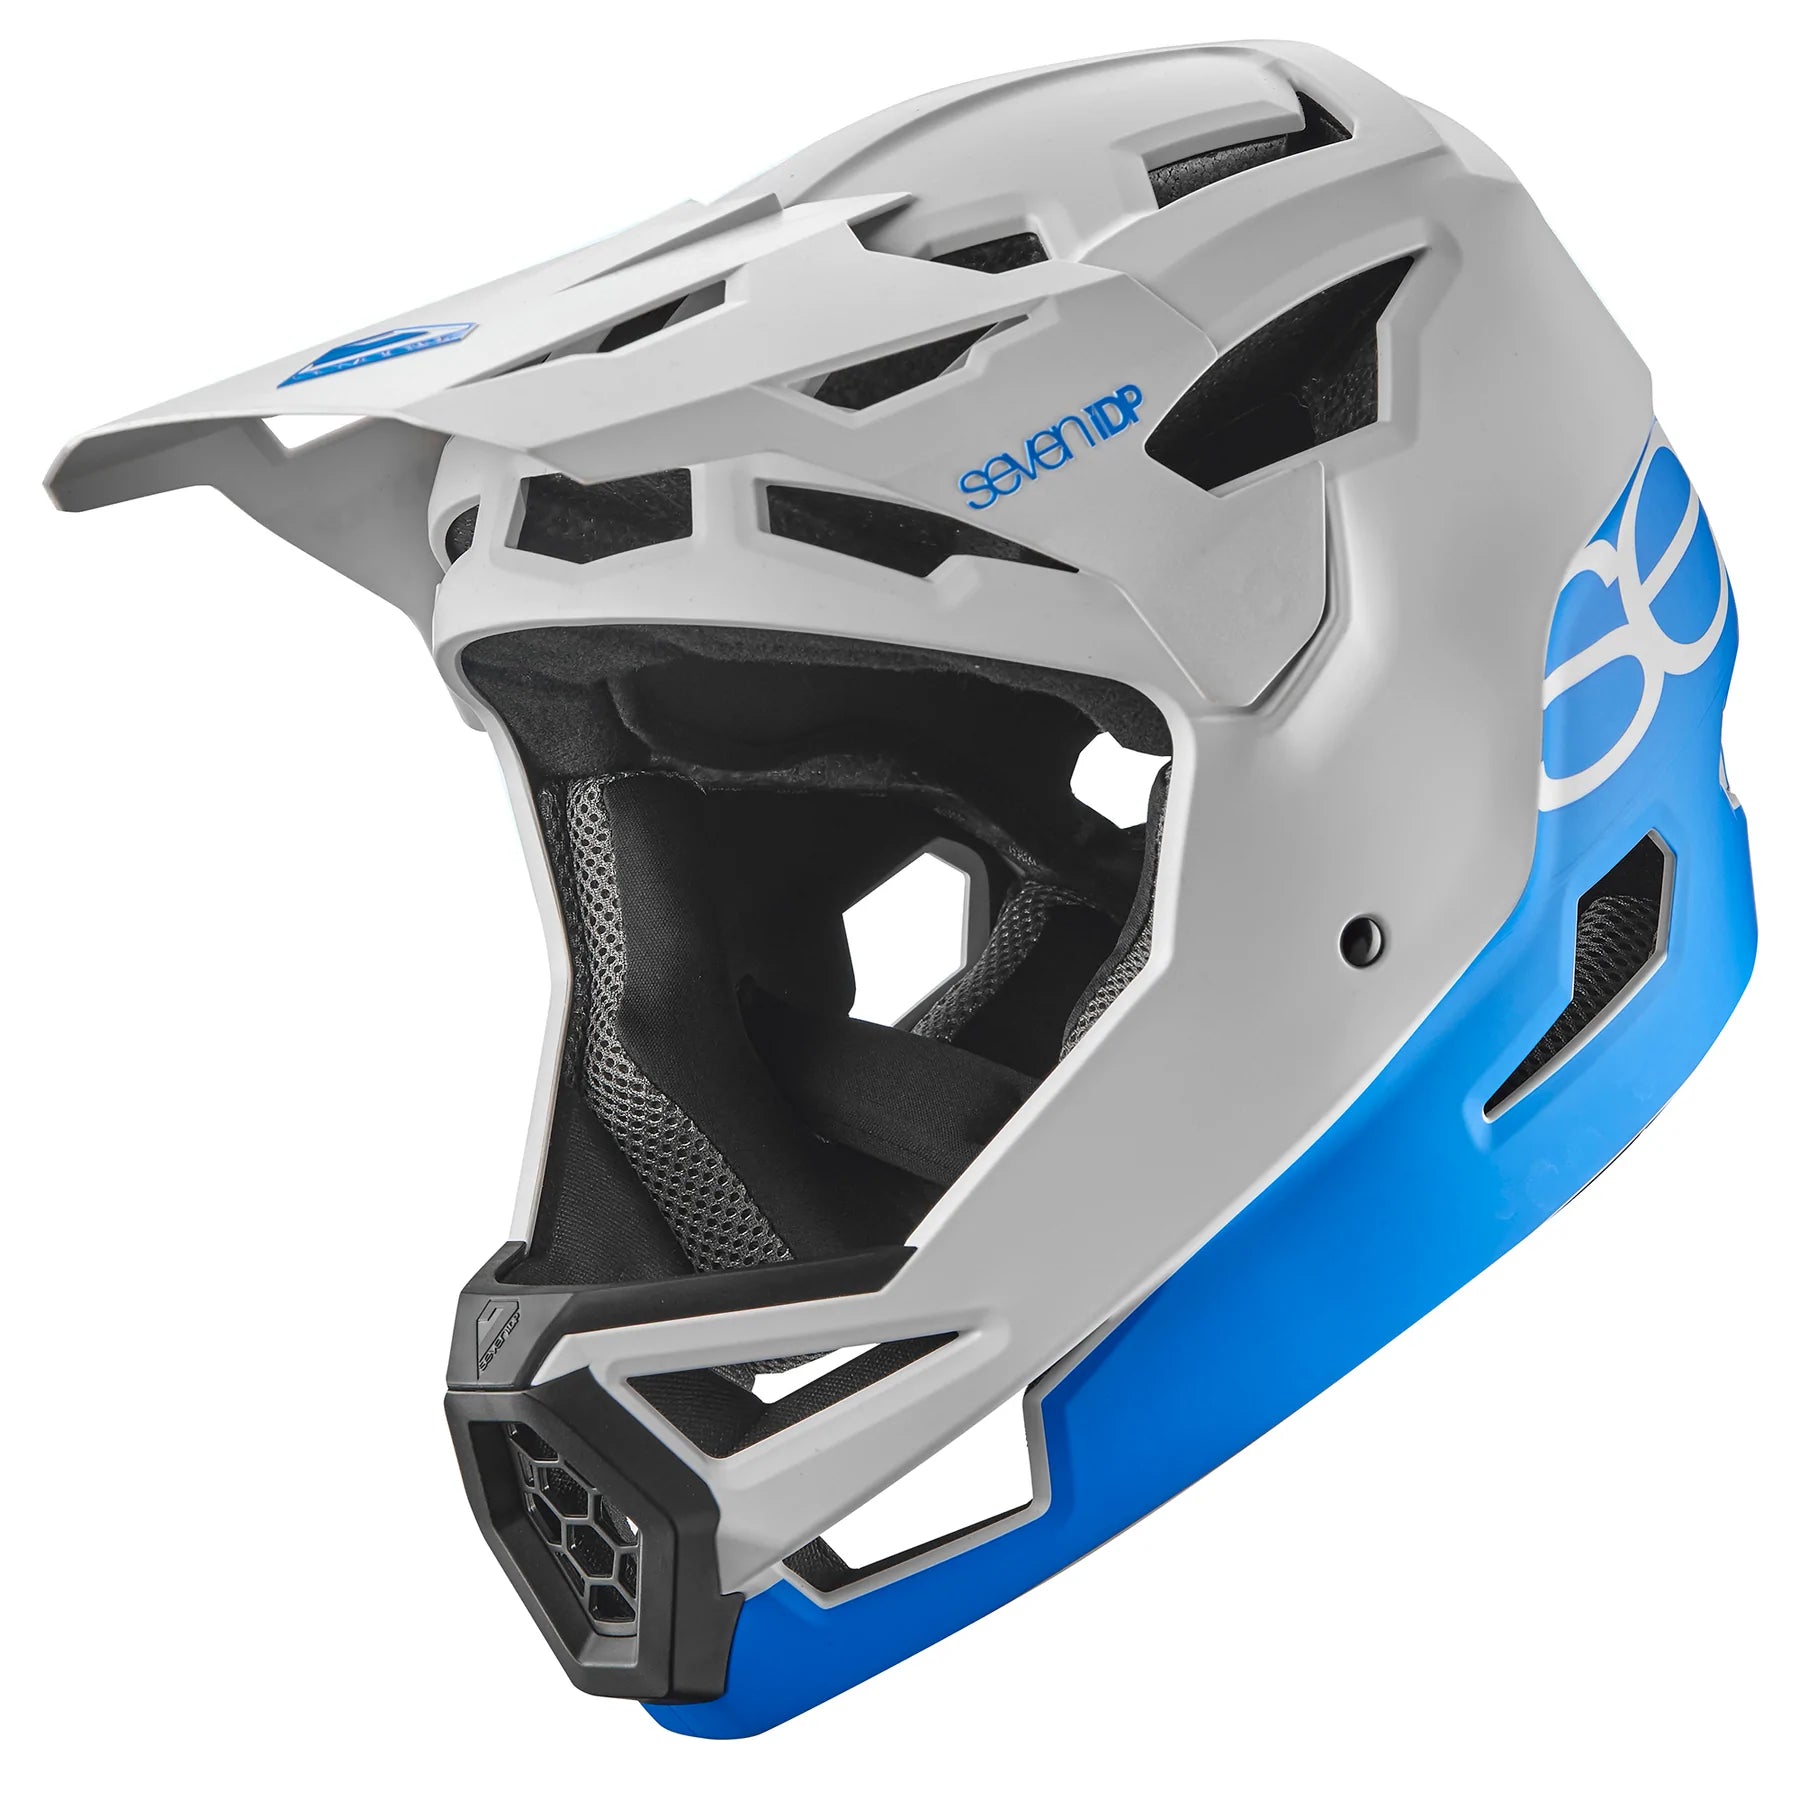 7 iDP Project 23 ABS Full Face Helmet - White-Blue